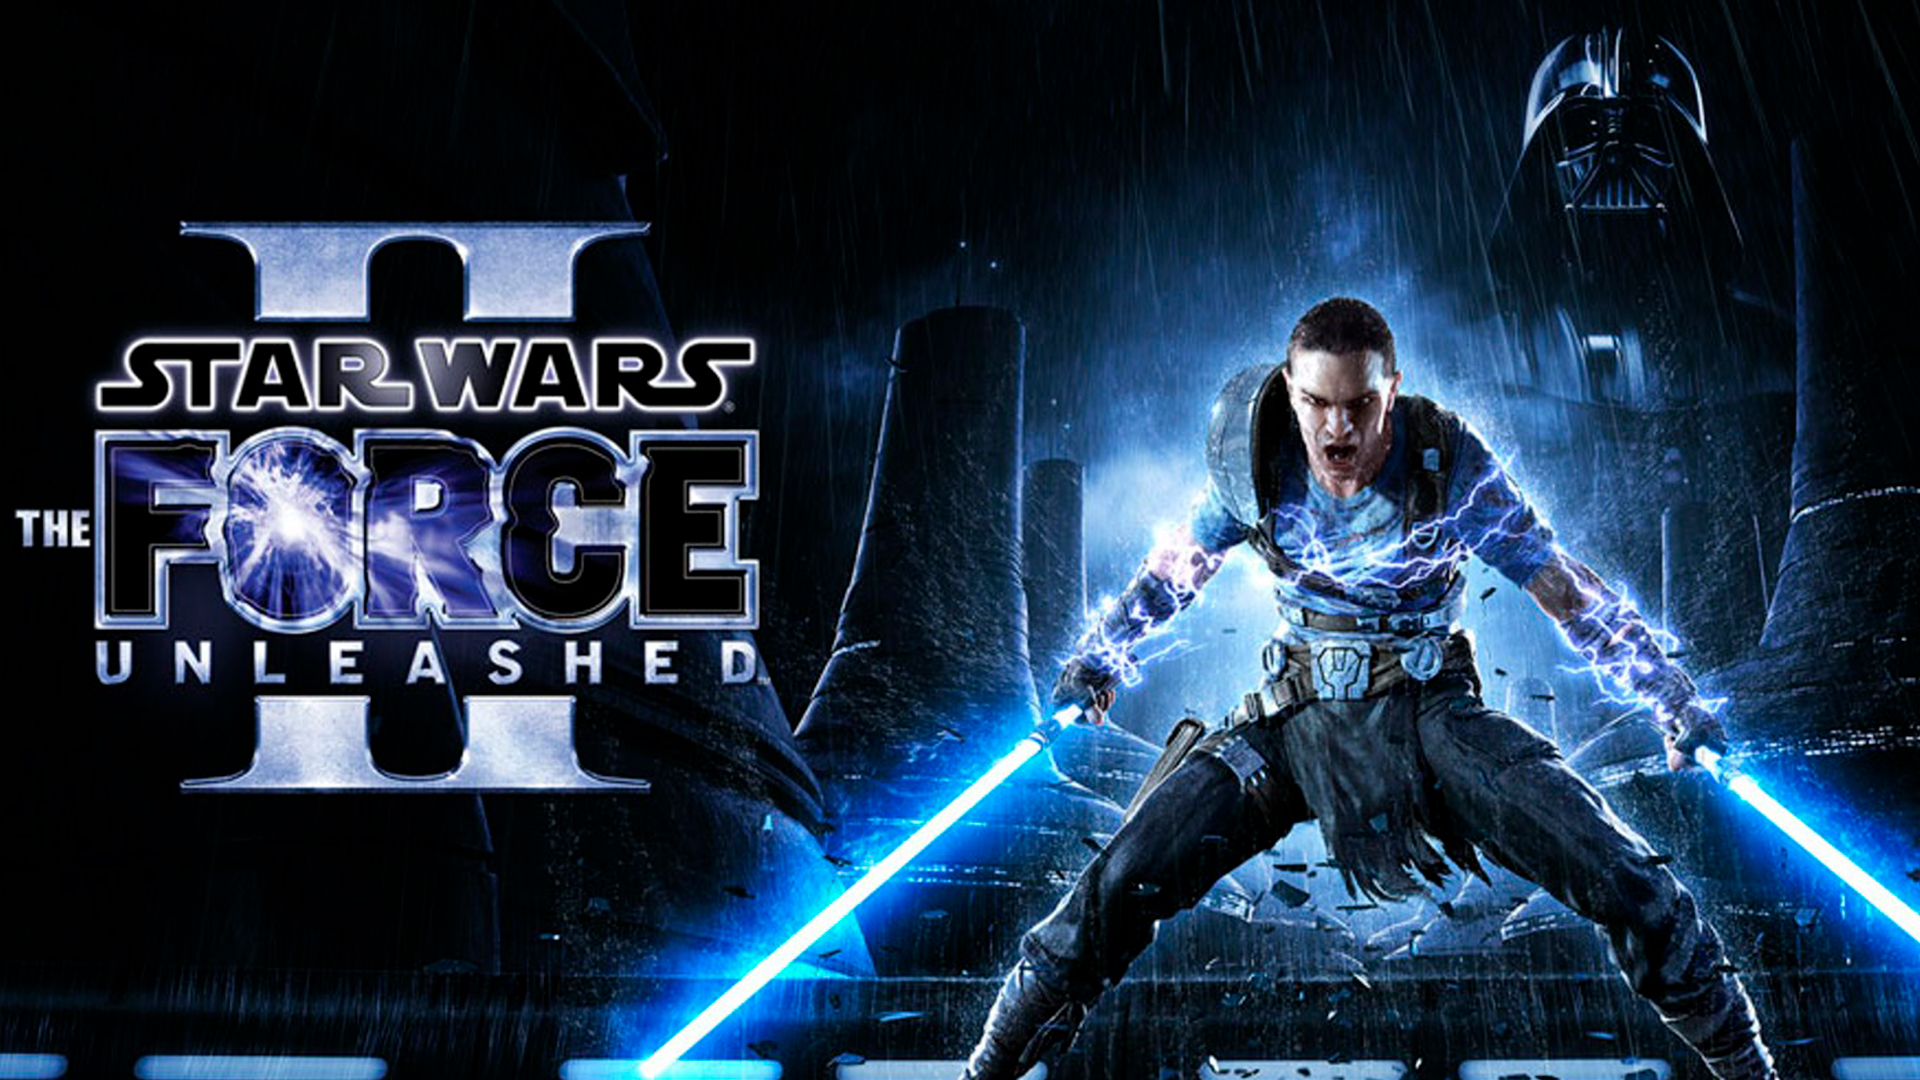 Игра star wars the force unleashed. Star Wars the Force unleashed 2 Постер. Star Wars the Force unleashed 1 обложка. Star Wars the Force unleashed 2 обложка. Стар ВАРС the Force unleashed 1.